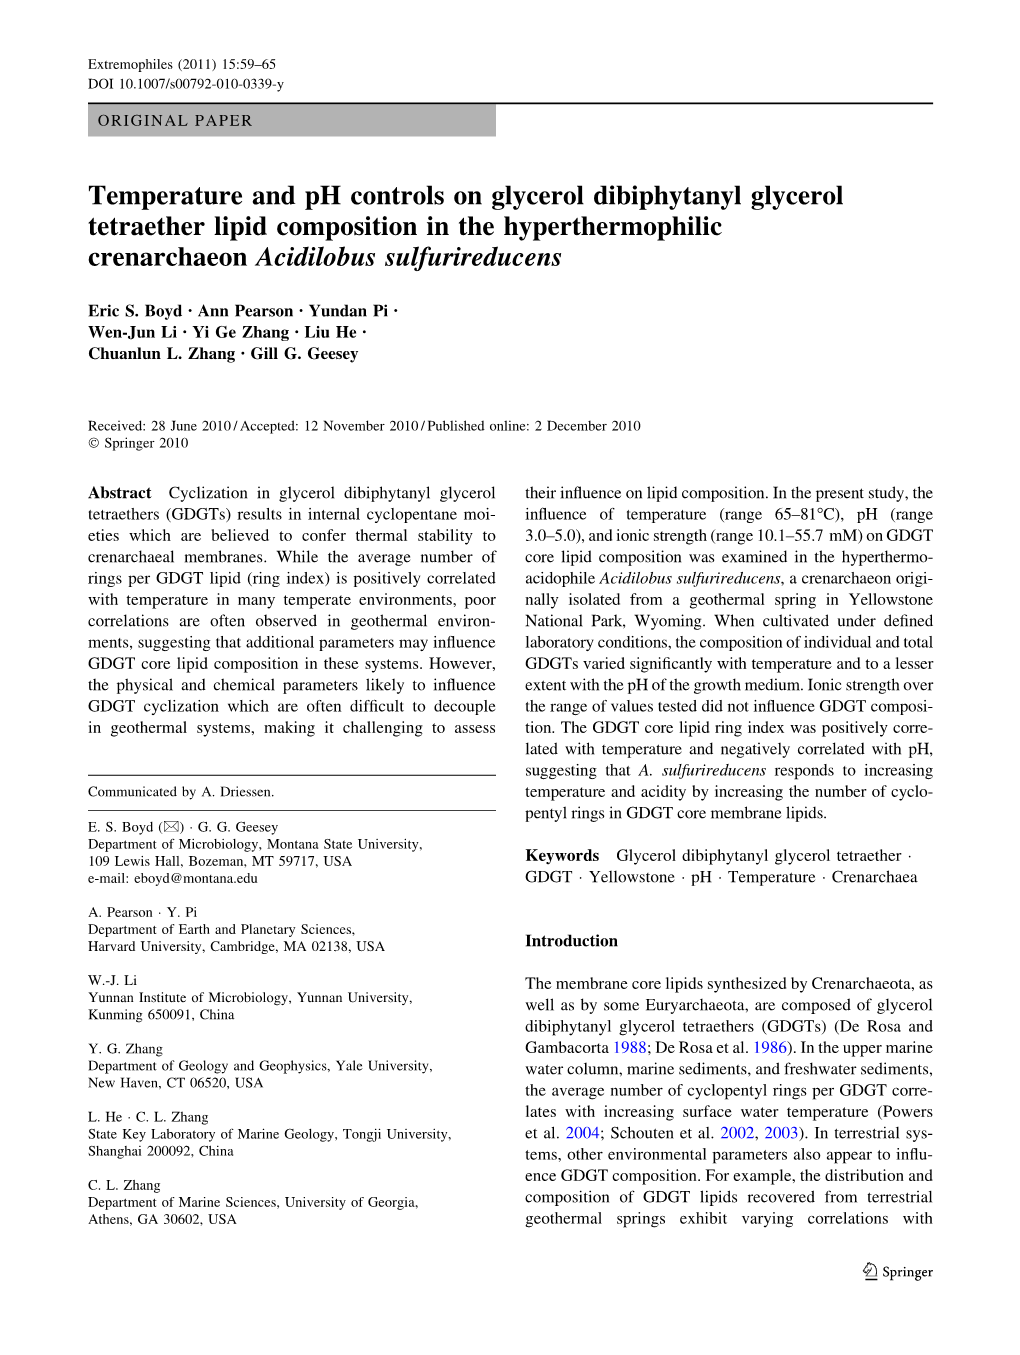 Temperature and Ph Controls on Glycerol Dibiphytanyl Glycerol Tetraether Lipid Composition in the Hyperthermophilic Crenarchaeon Acidilobus Sulfurireducens